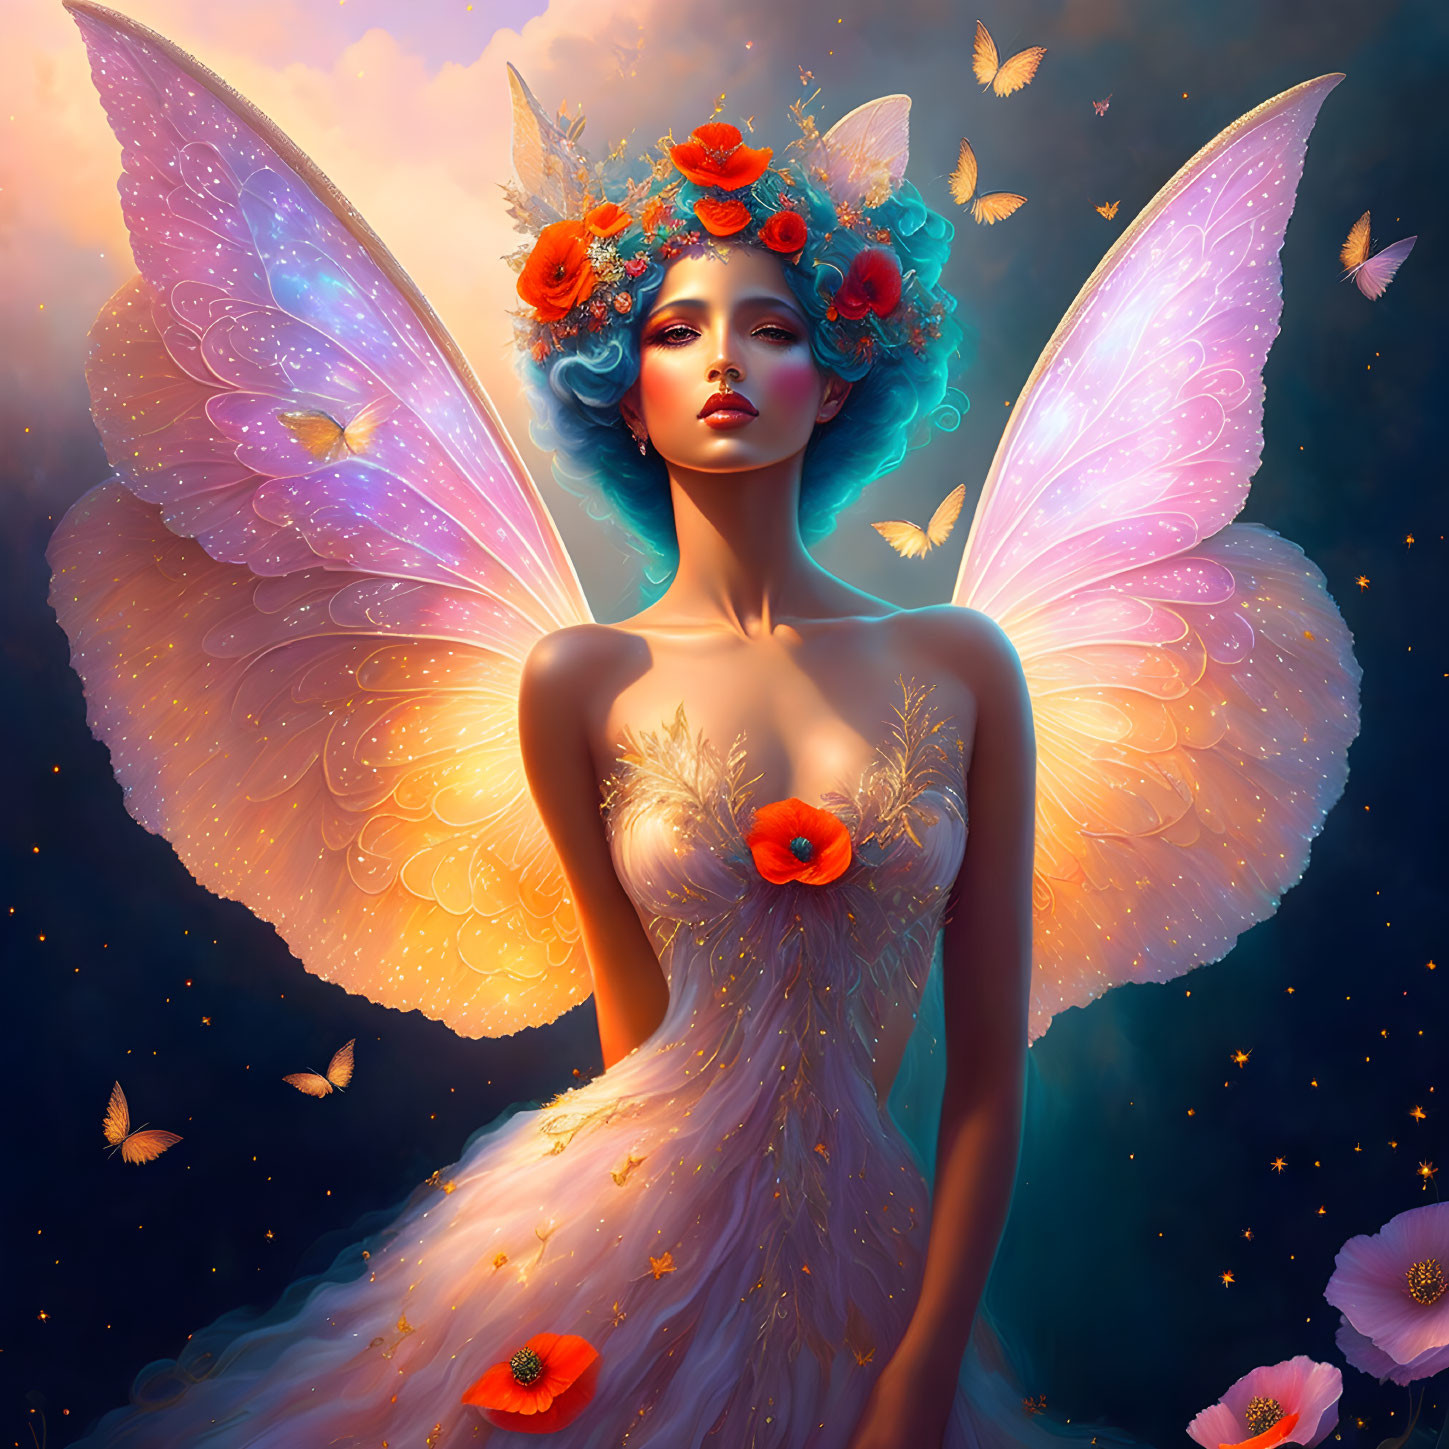 Mystical woman with butterfly wings and floral gown among serene butterflies